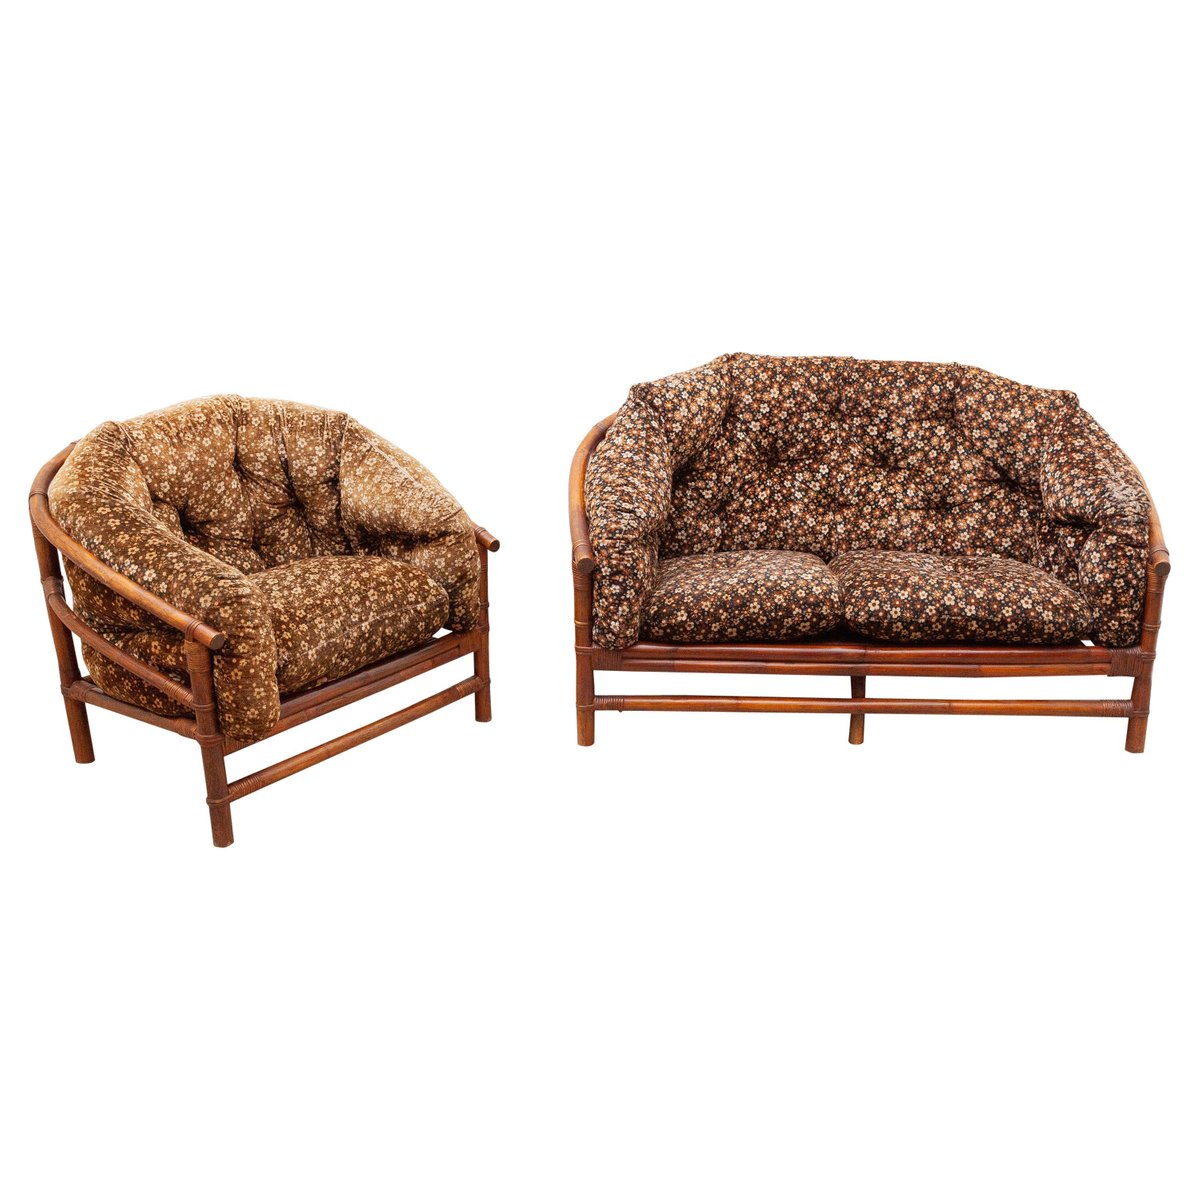 vintage bamboo lounge chair and sofa set of 2 KL-1000883